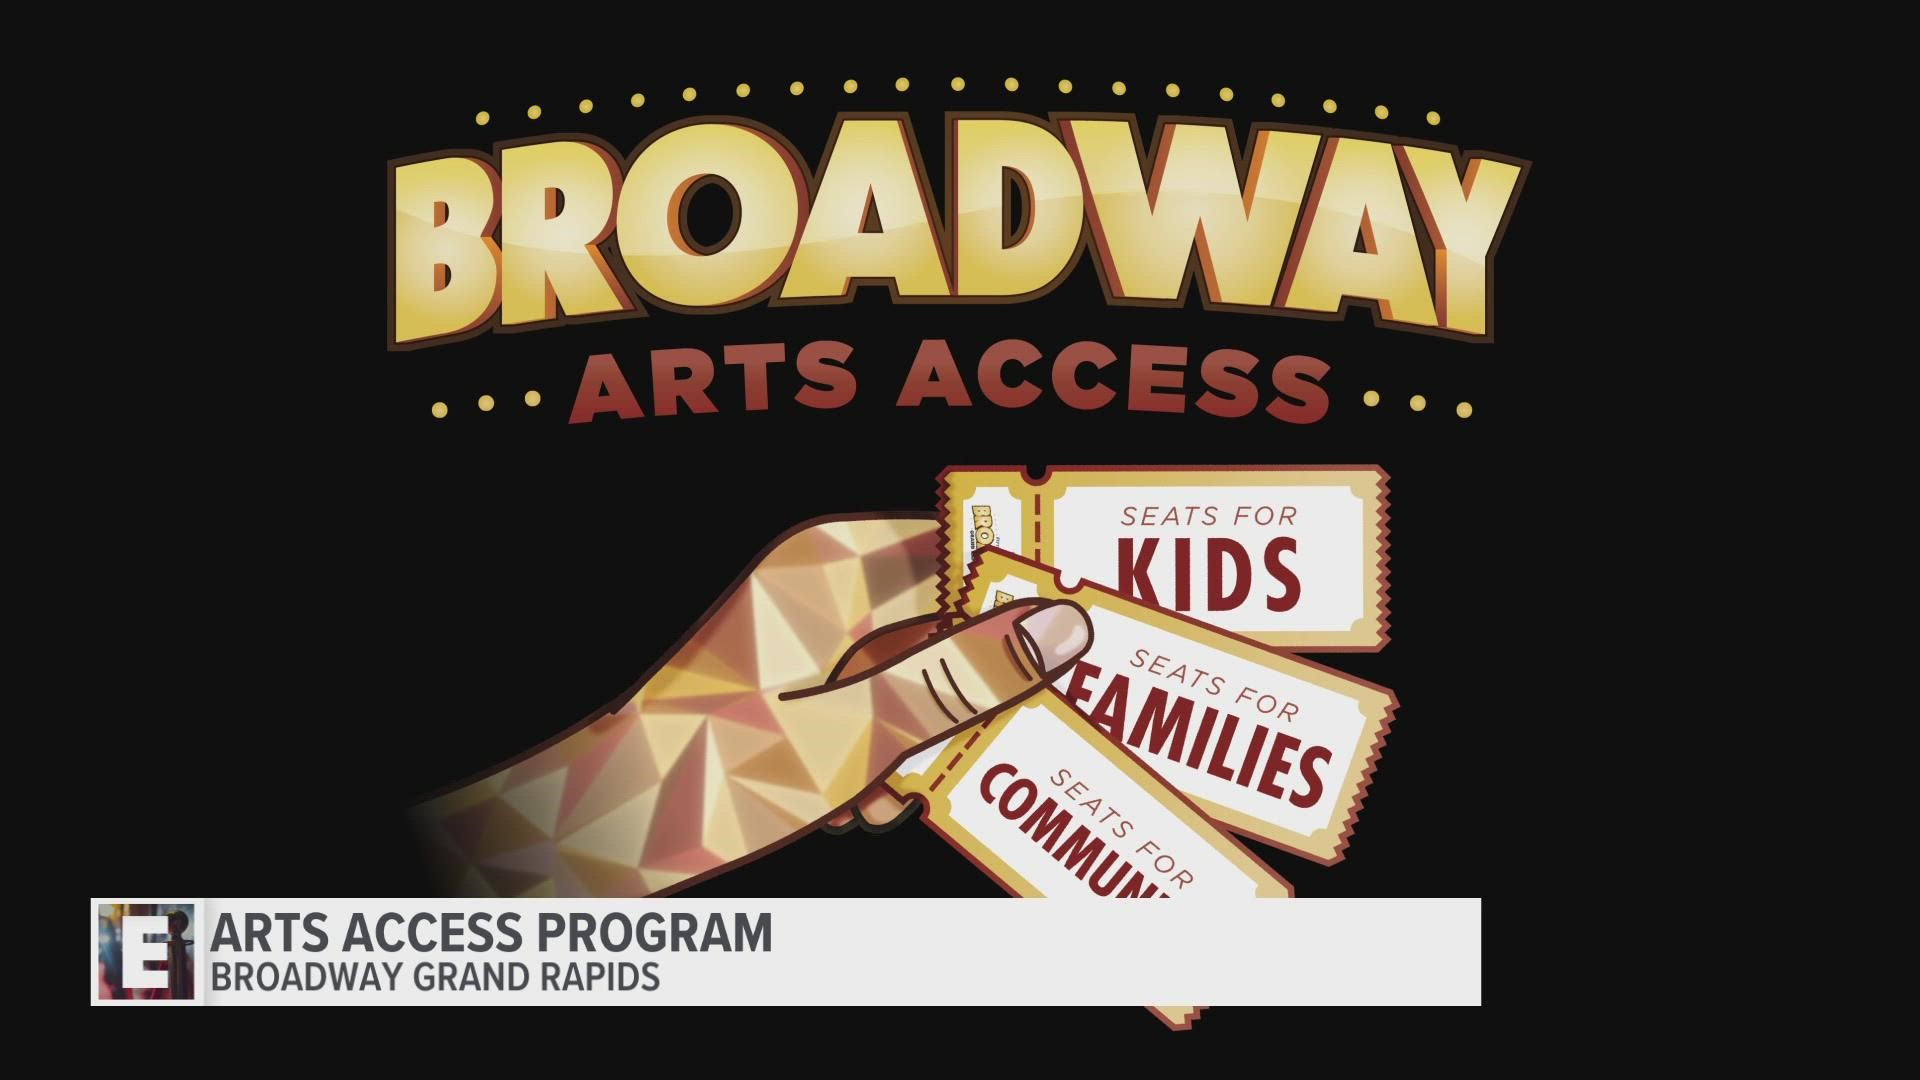 The arts access program will enhance their mission to be inclusive, breaking down economic, physical and cultural barriers to the theatre.